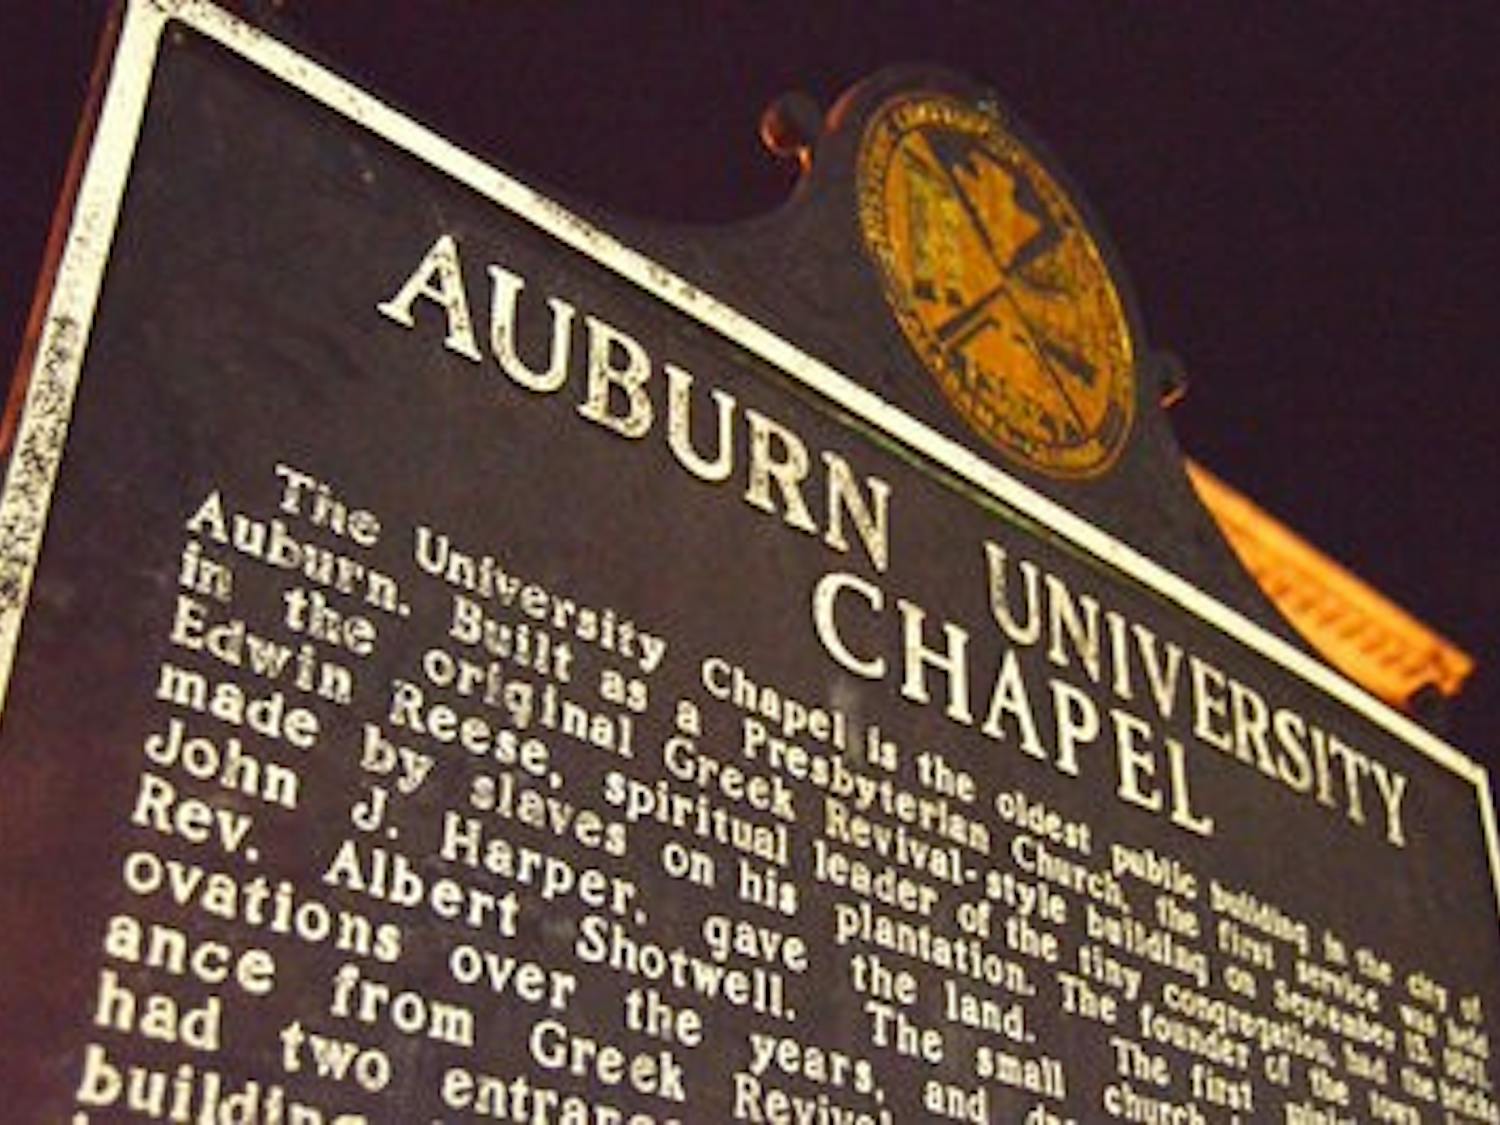 The Auburn University Chapel is considered haunted by a Civil War solider, Sydney Grimlett, who is known to turn the water on and off in the bathrooms